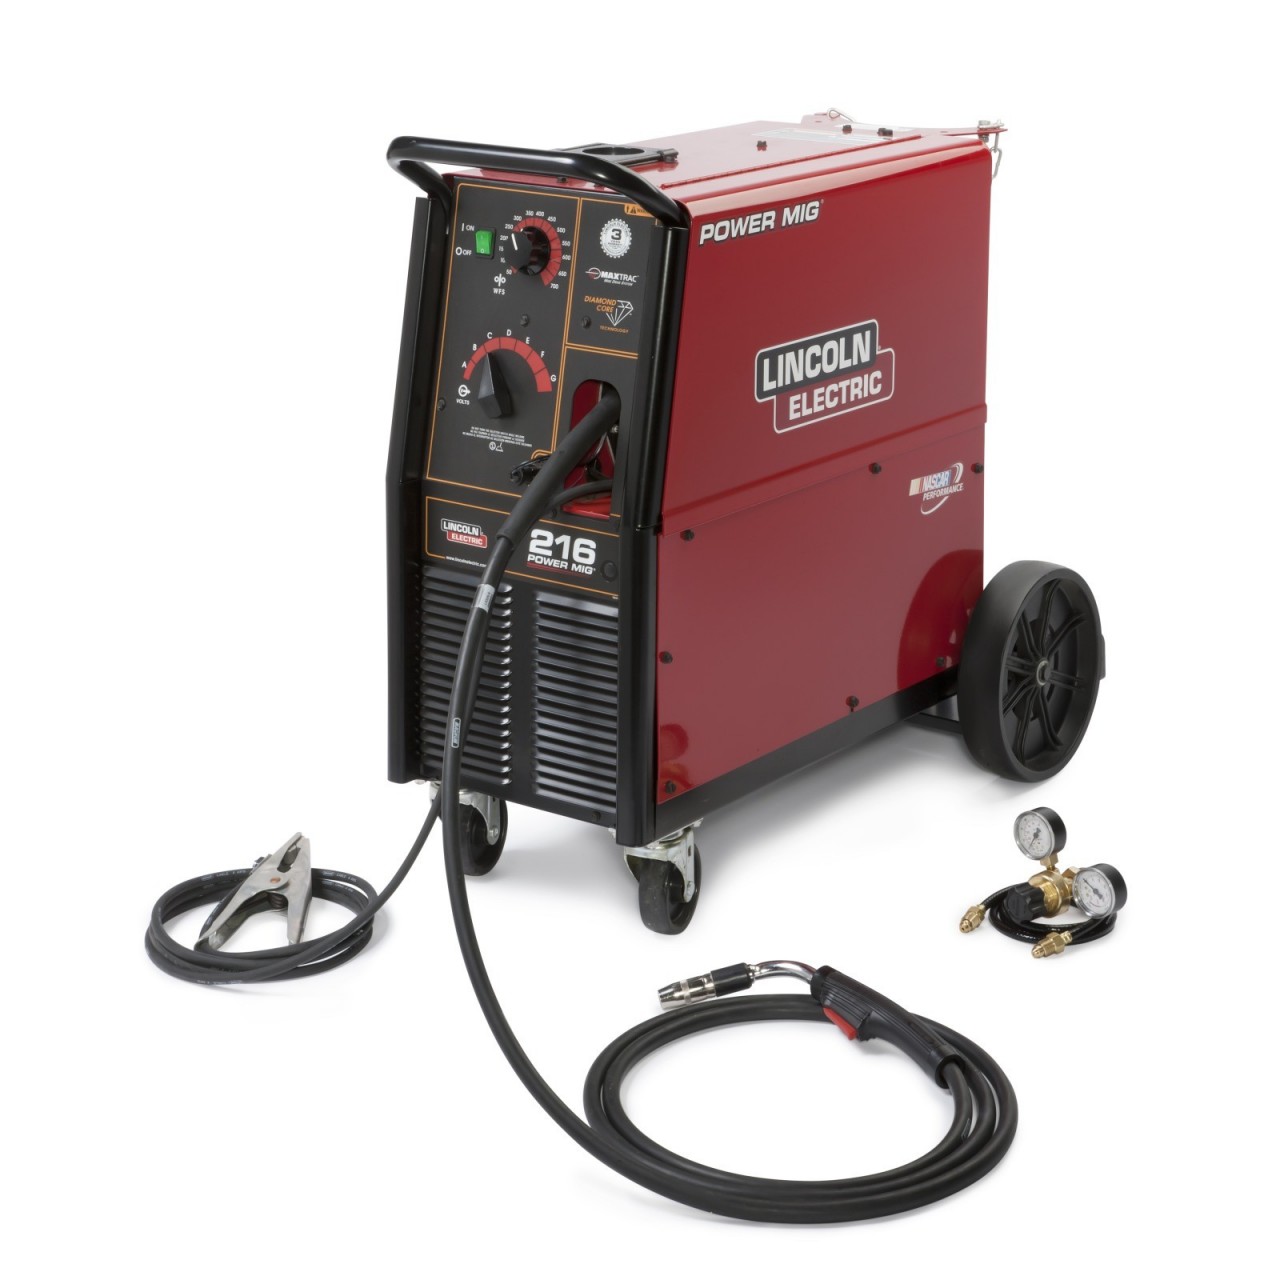 Lincoln Power MIG 216 Welder Package.